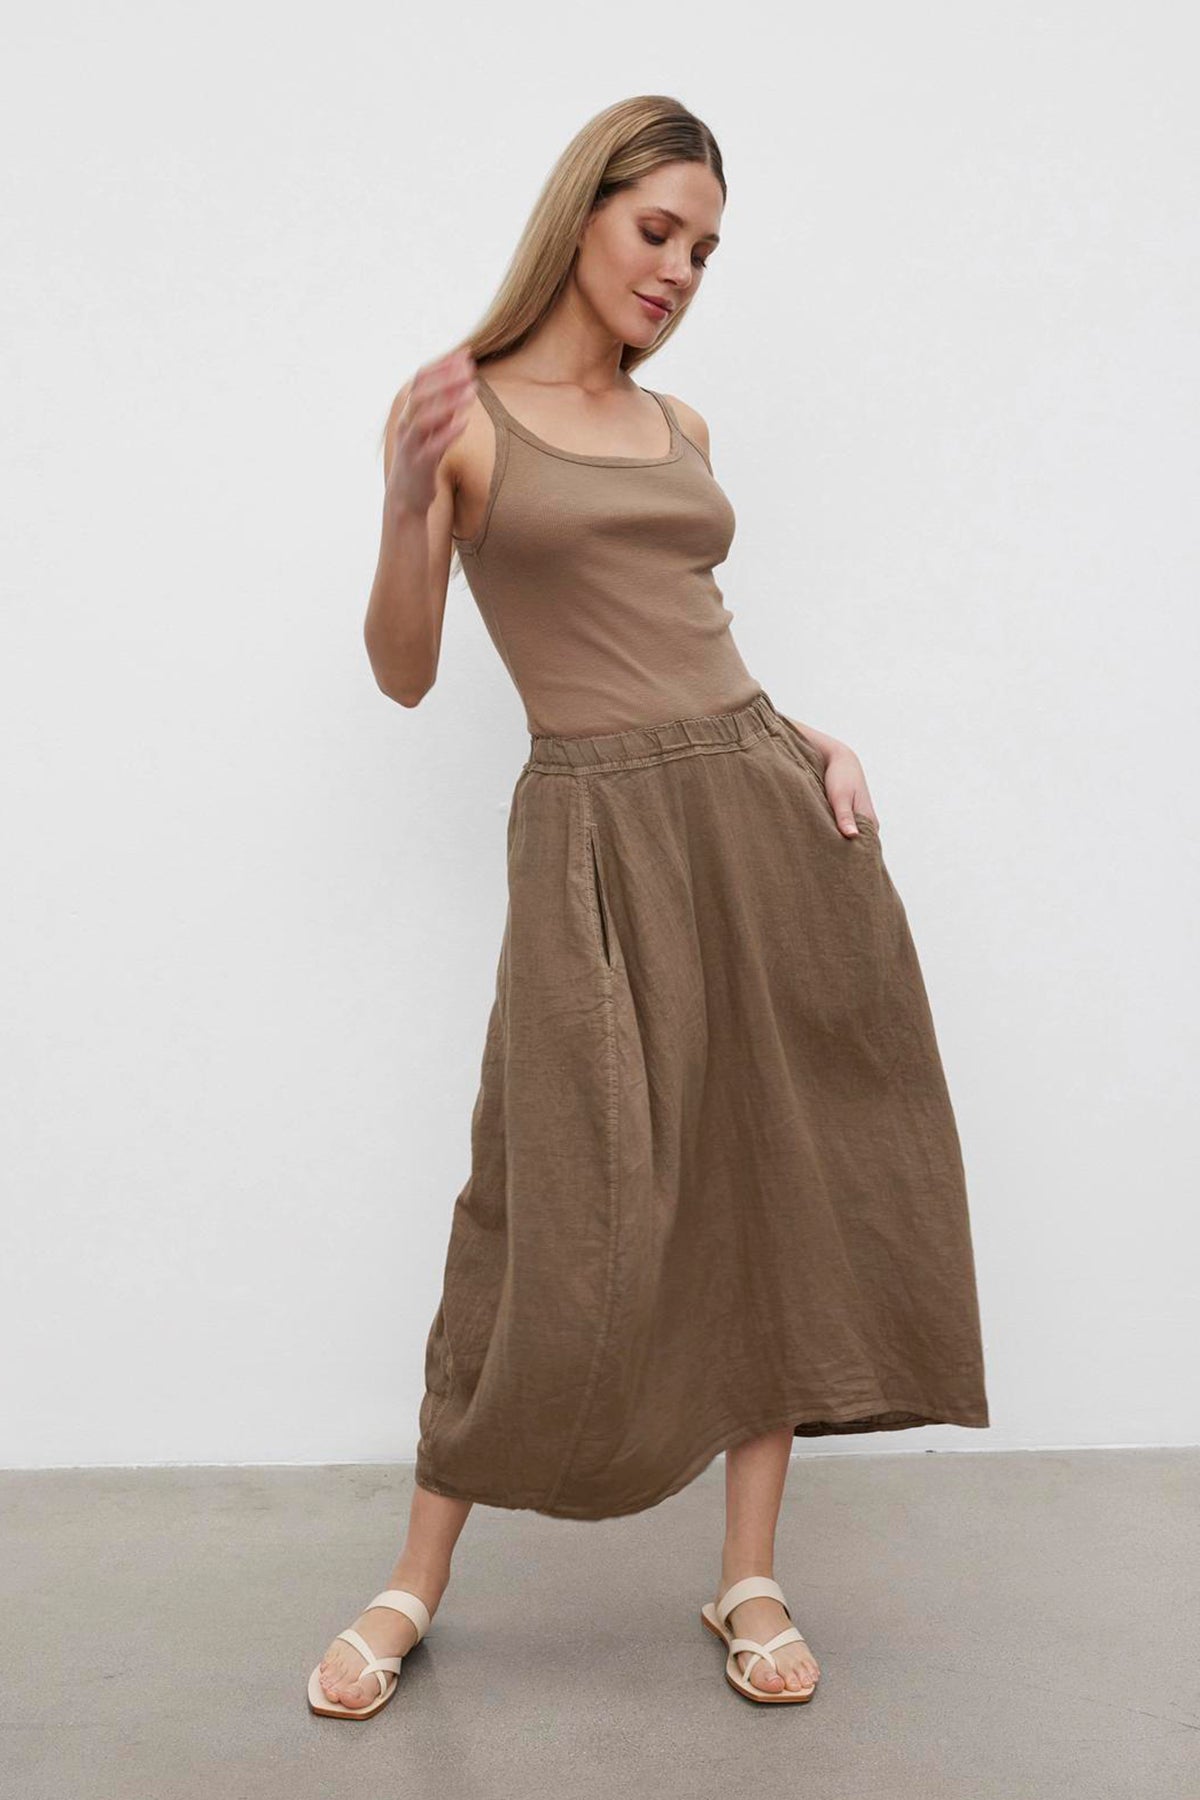 A woman in a sleeveless top and the Velvet by Graham & Spencer FAE Linen A-line skirt with an elastic waistband posing against a plain background.-36443407089857